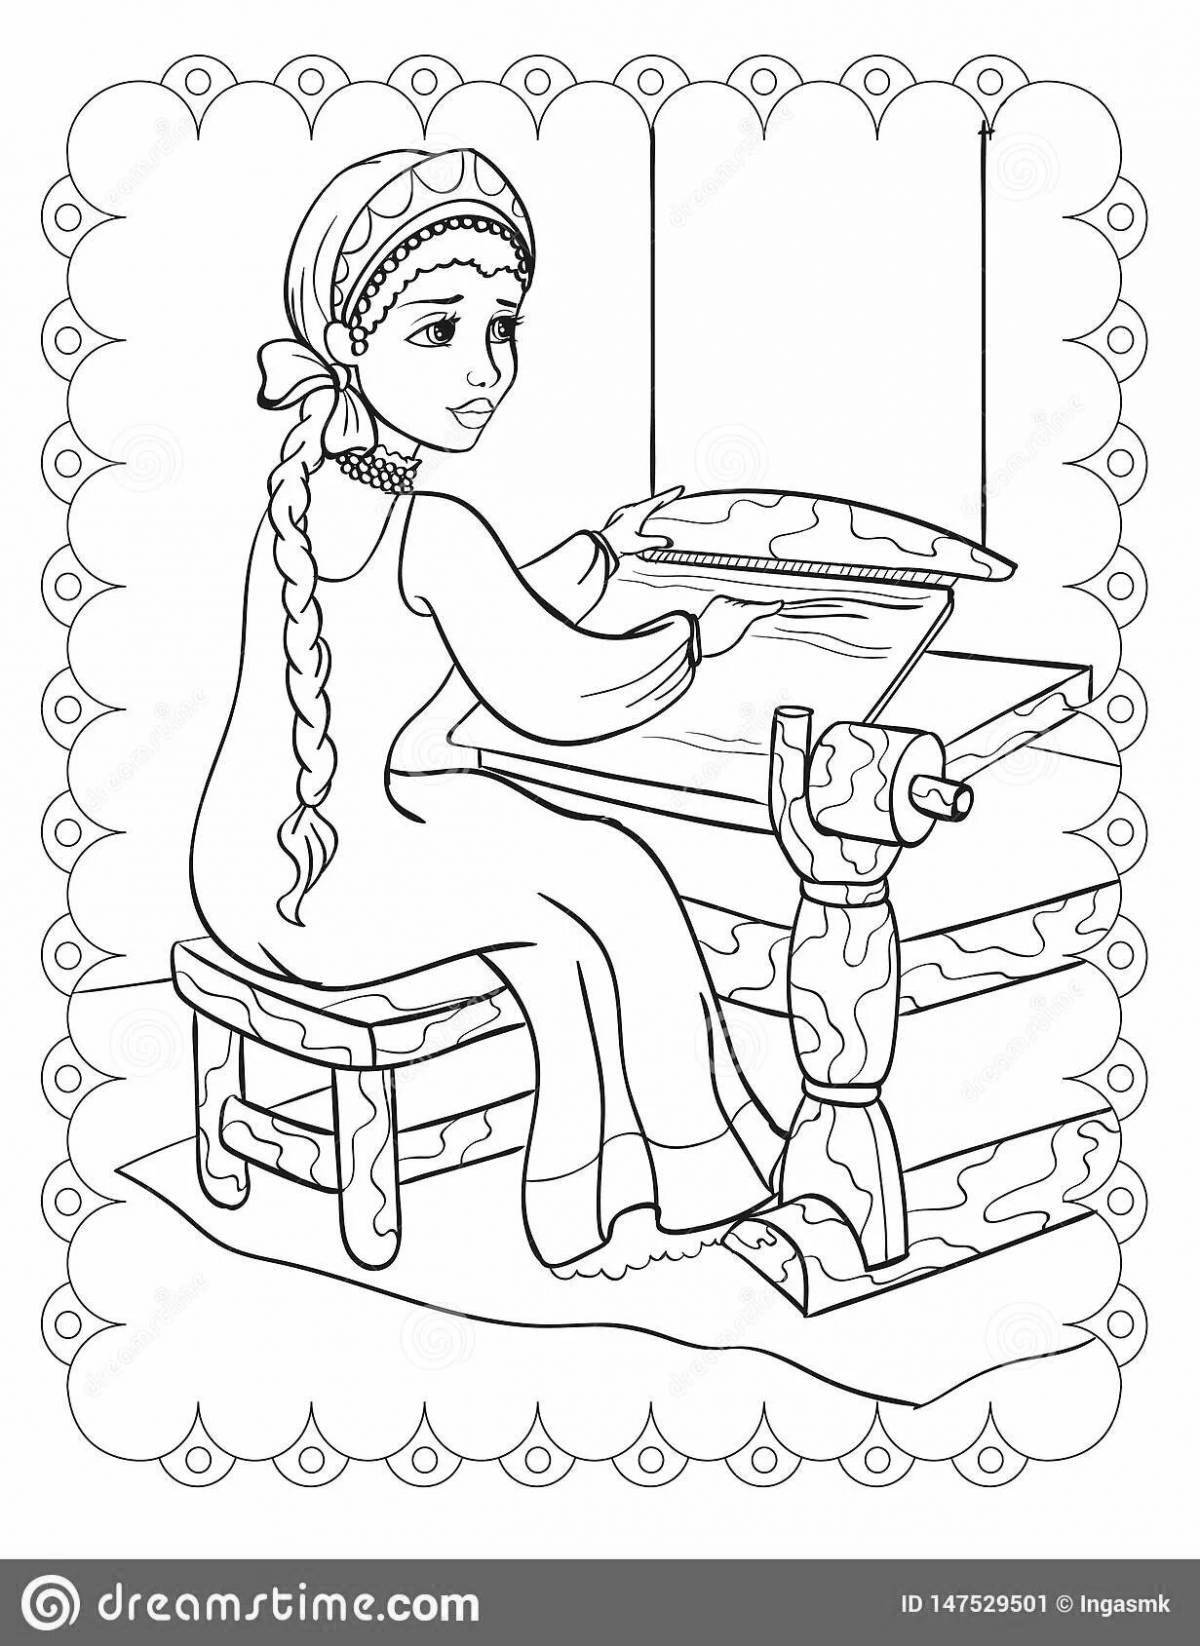 Live coloring book based on Bazhov's fairy tales for preschoolers